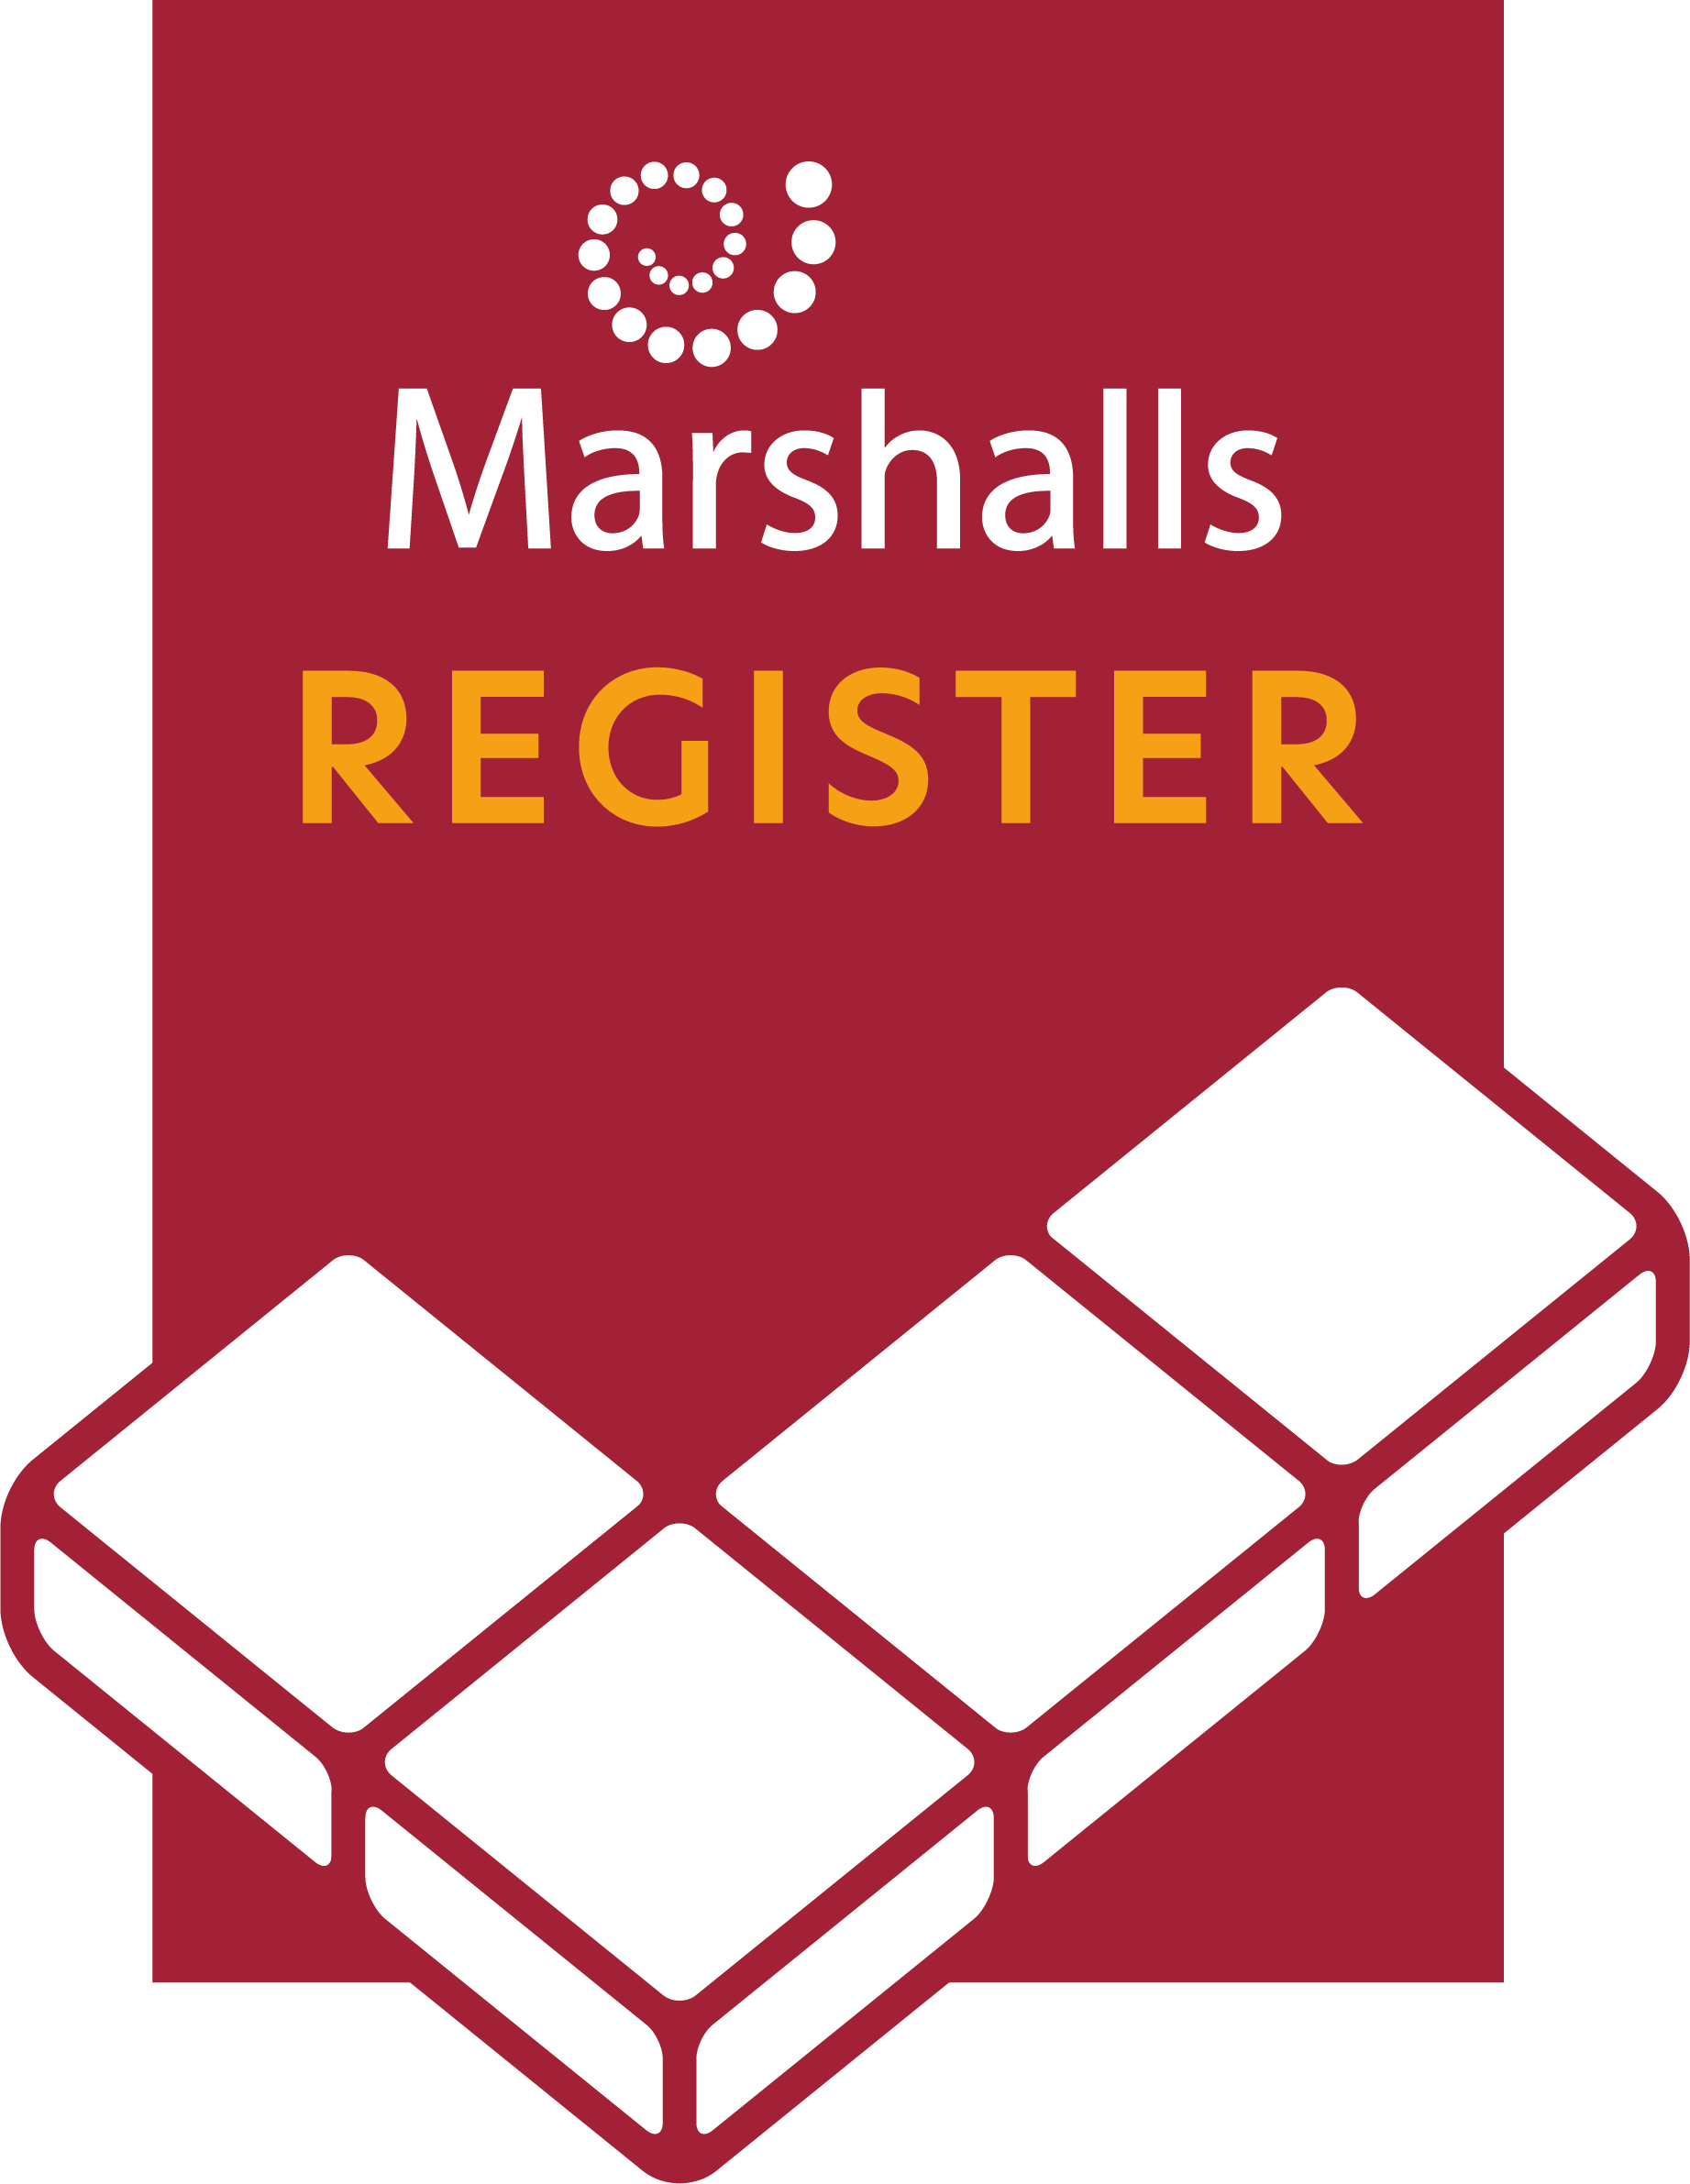 Marshalls Hard Landscaping and Construction Products logo